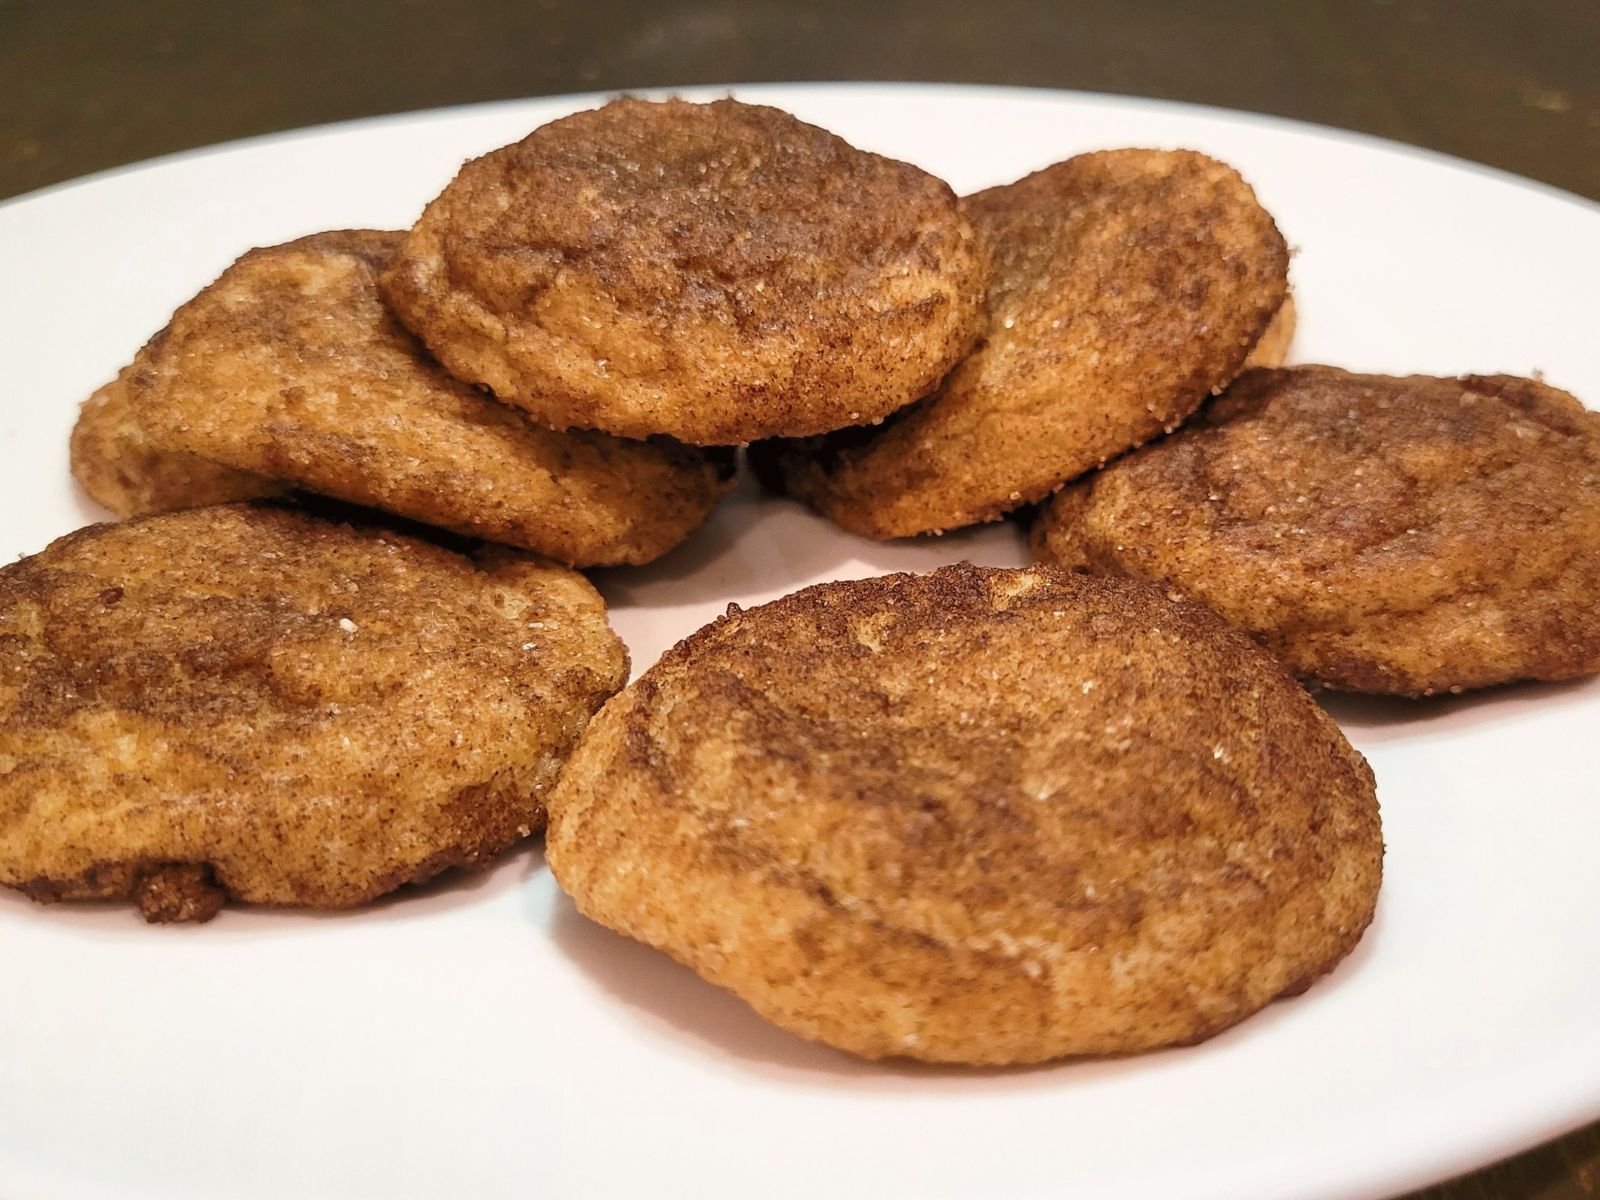 a white plate full of Chewy snickerdoodles fresh milled flour cookies. cinnamon and sugar coating all around the baked cookies.